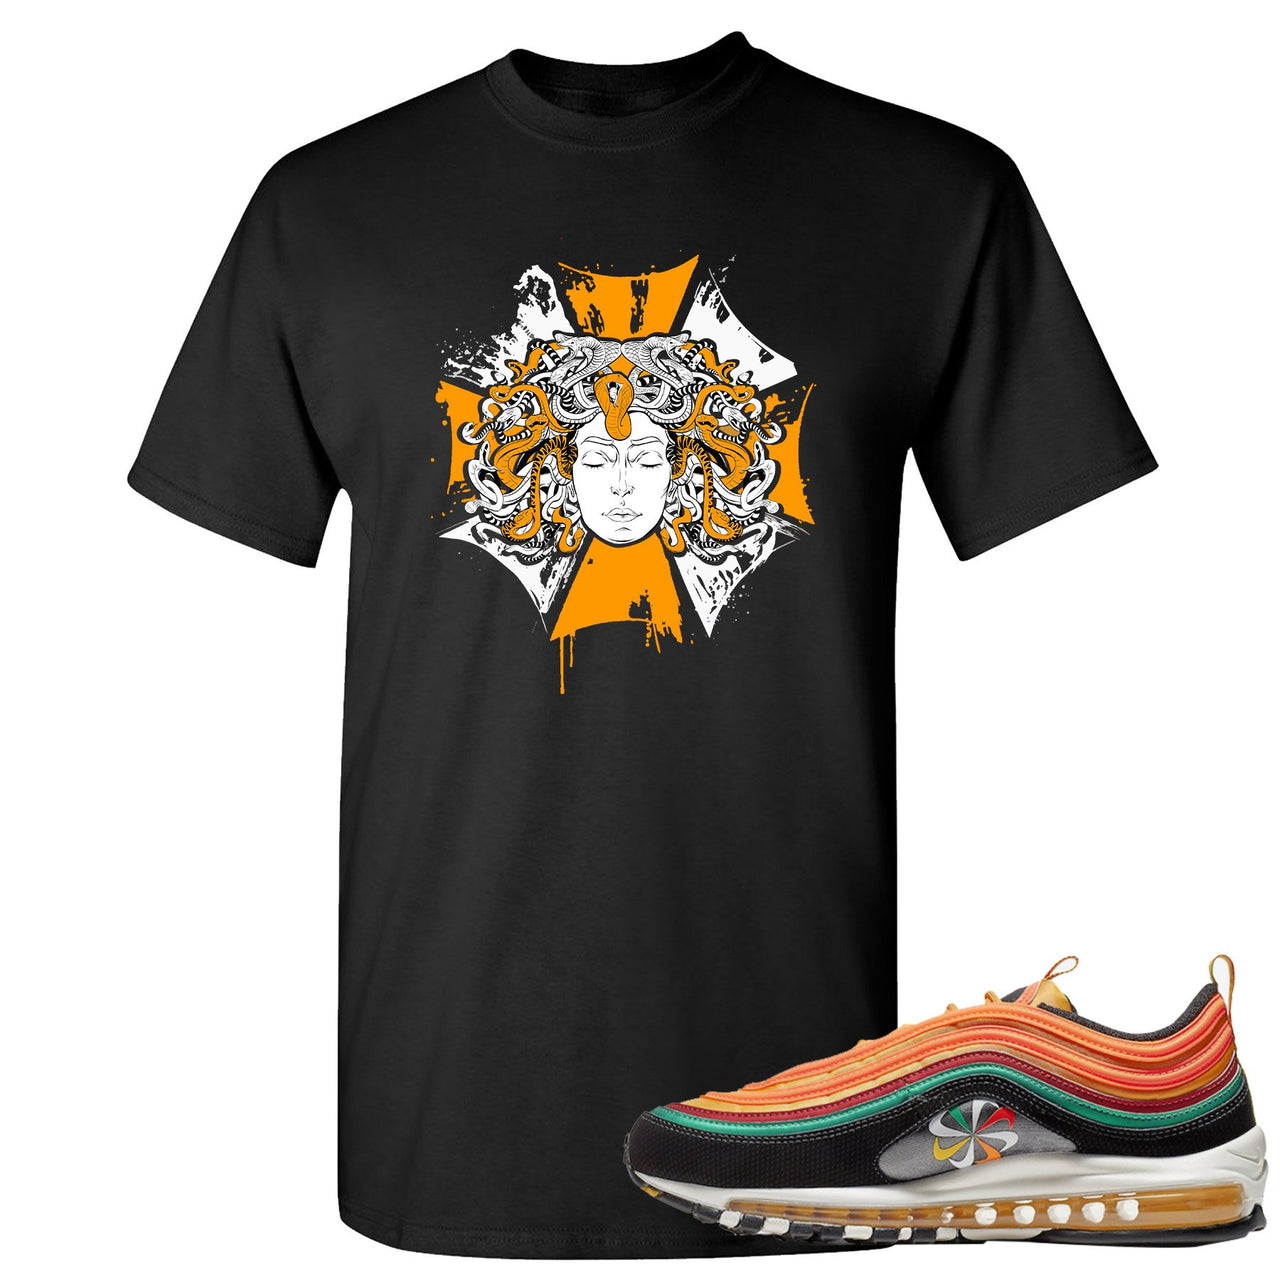 Printed on the front of the Air Max 97 Sunburst black sneaker matching t-shirt is the Medusa logo